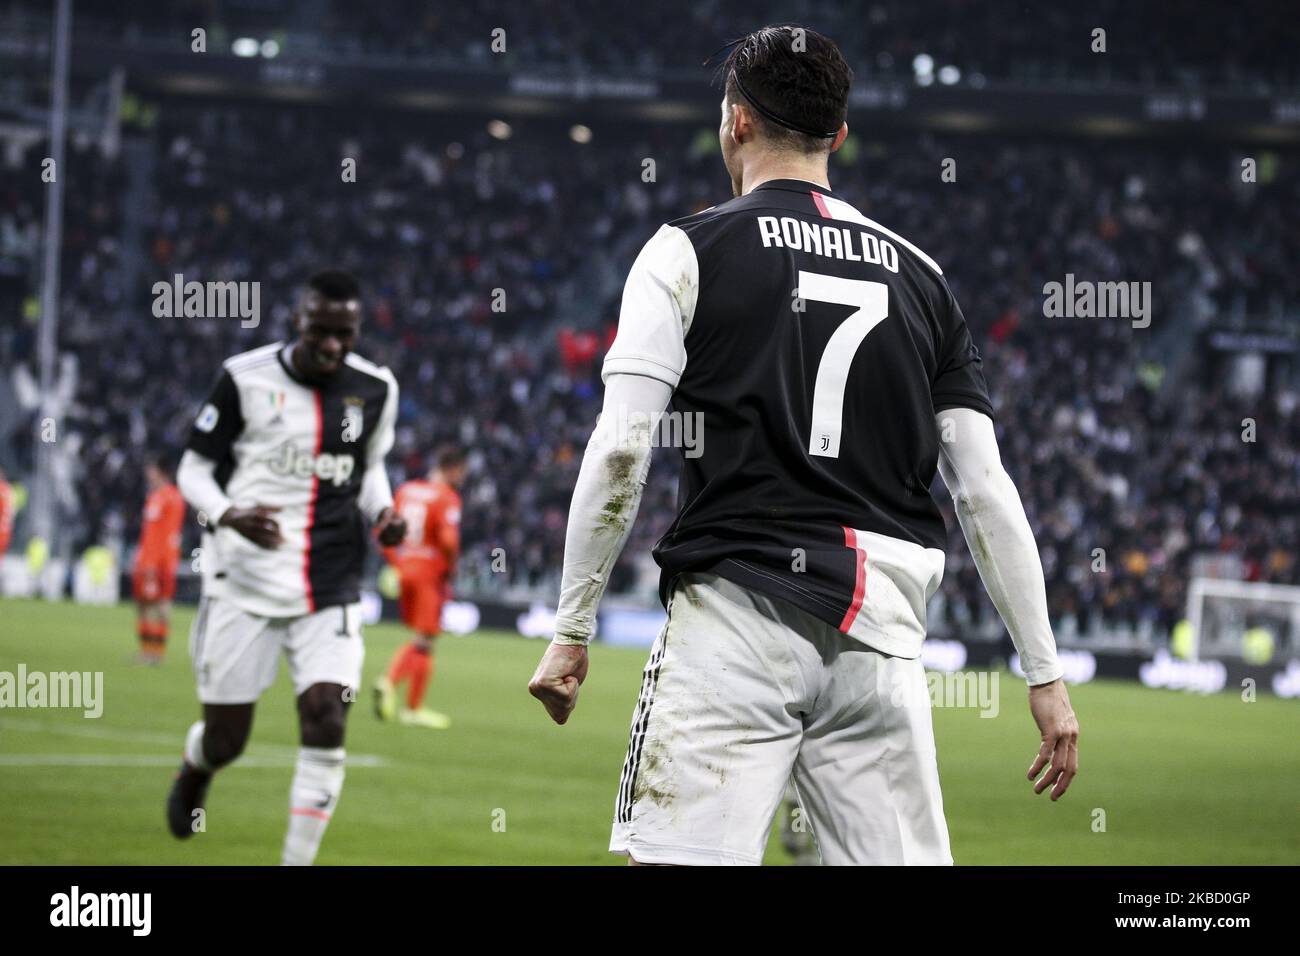 Juventus forward Cristiano Ronaldo (7) celebrates after scoring his goal to  make it 2-0 during the Serie A football match n.16 JUVENTUS - UDINESE on  December 15, 2019 at the Allianz Stadium